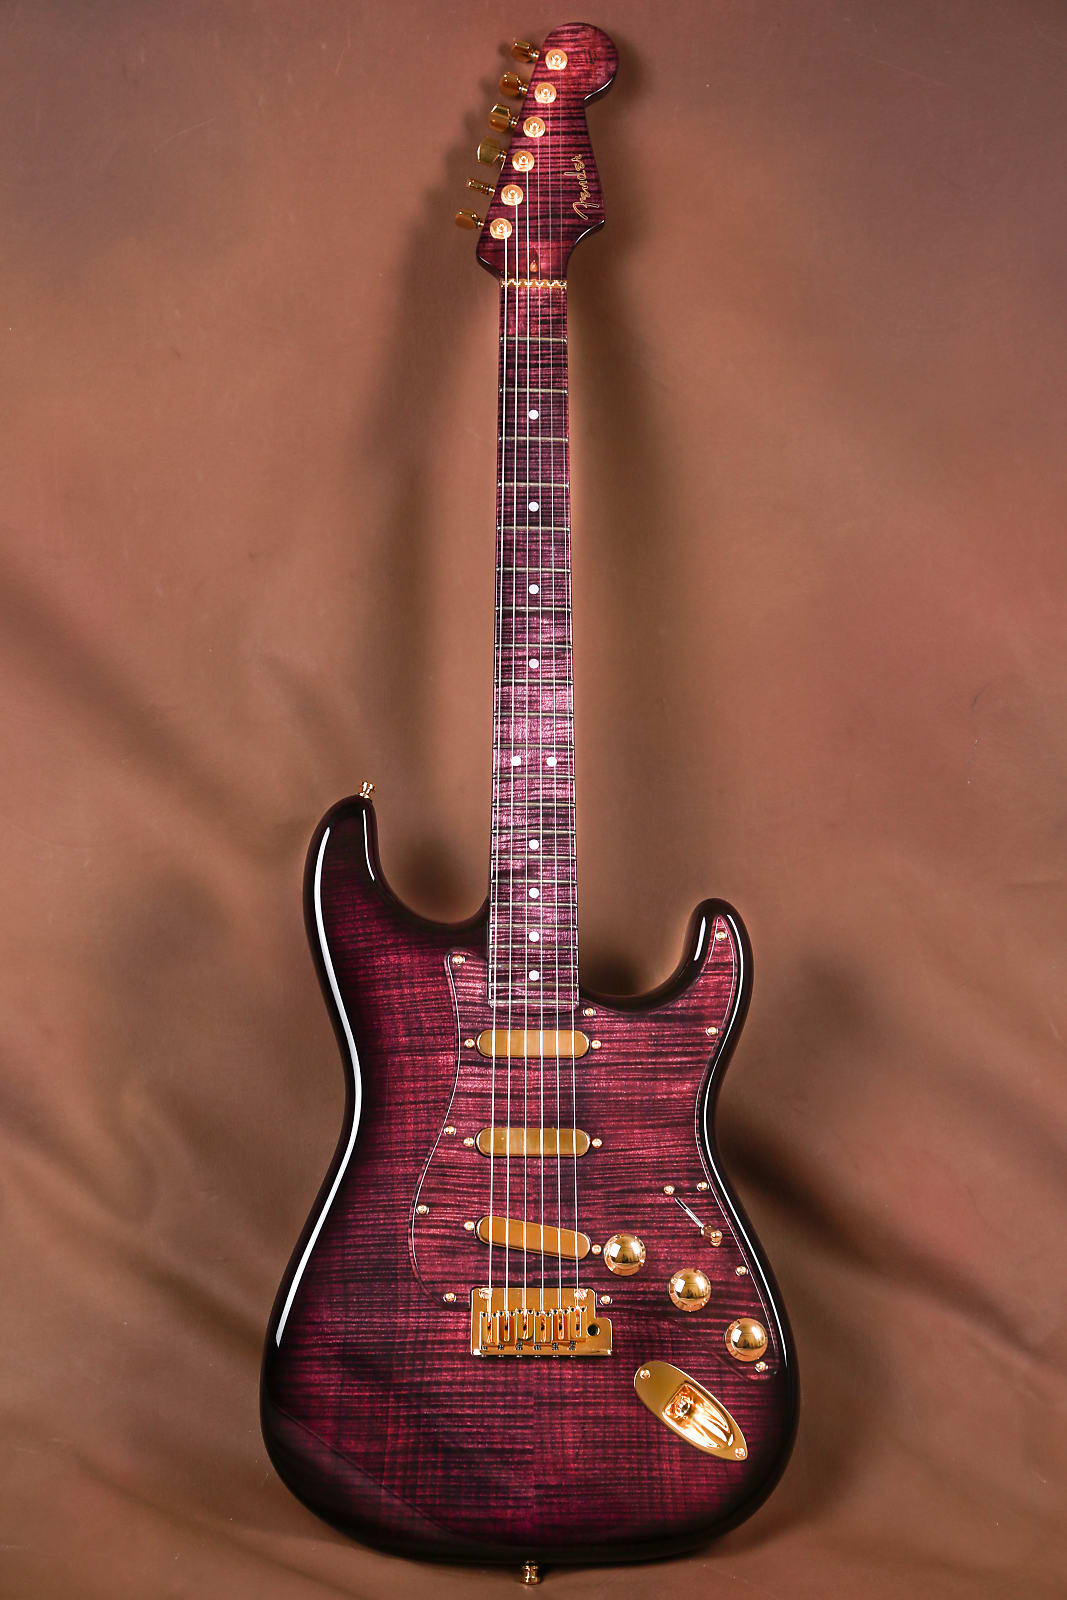 Everything is purple on this guitar, except for the hardware and pick ups, which are all gold